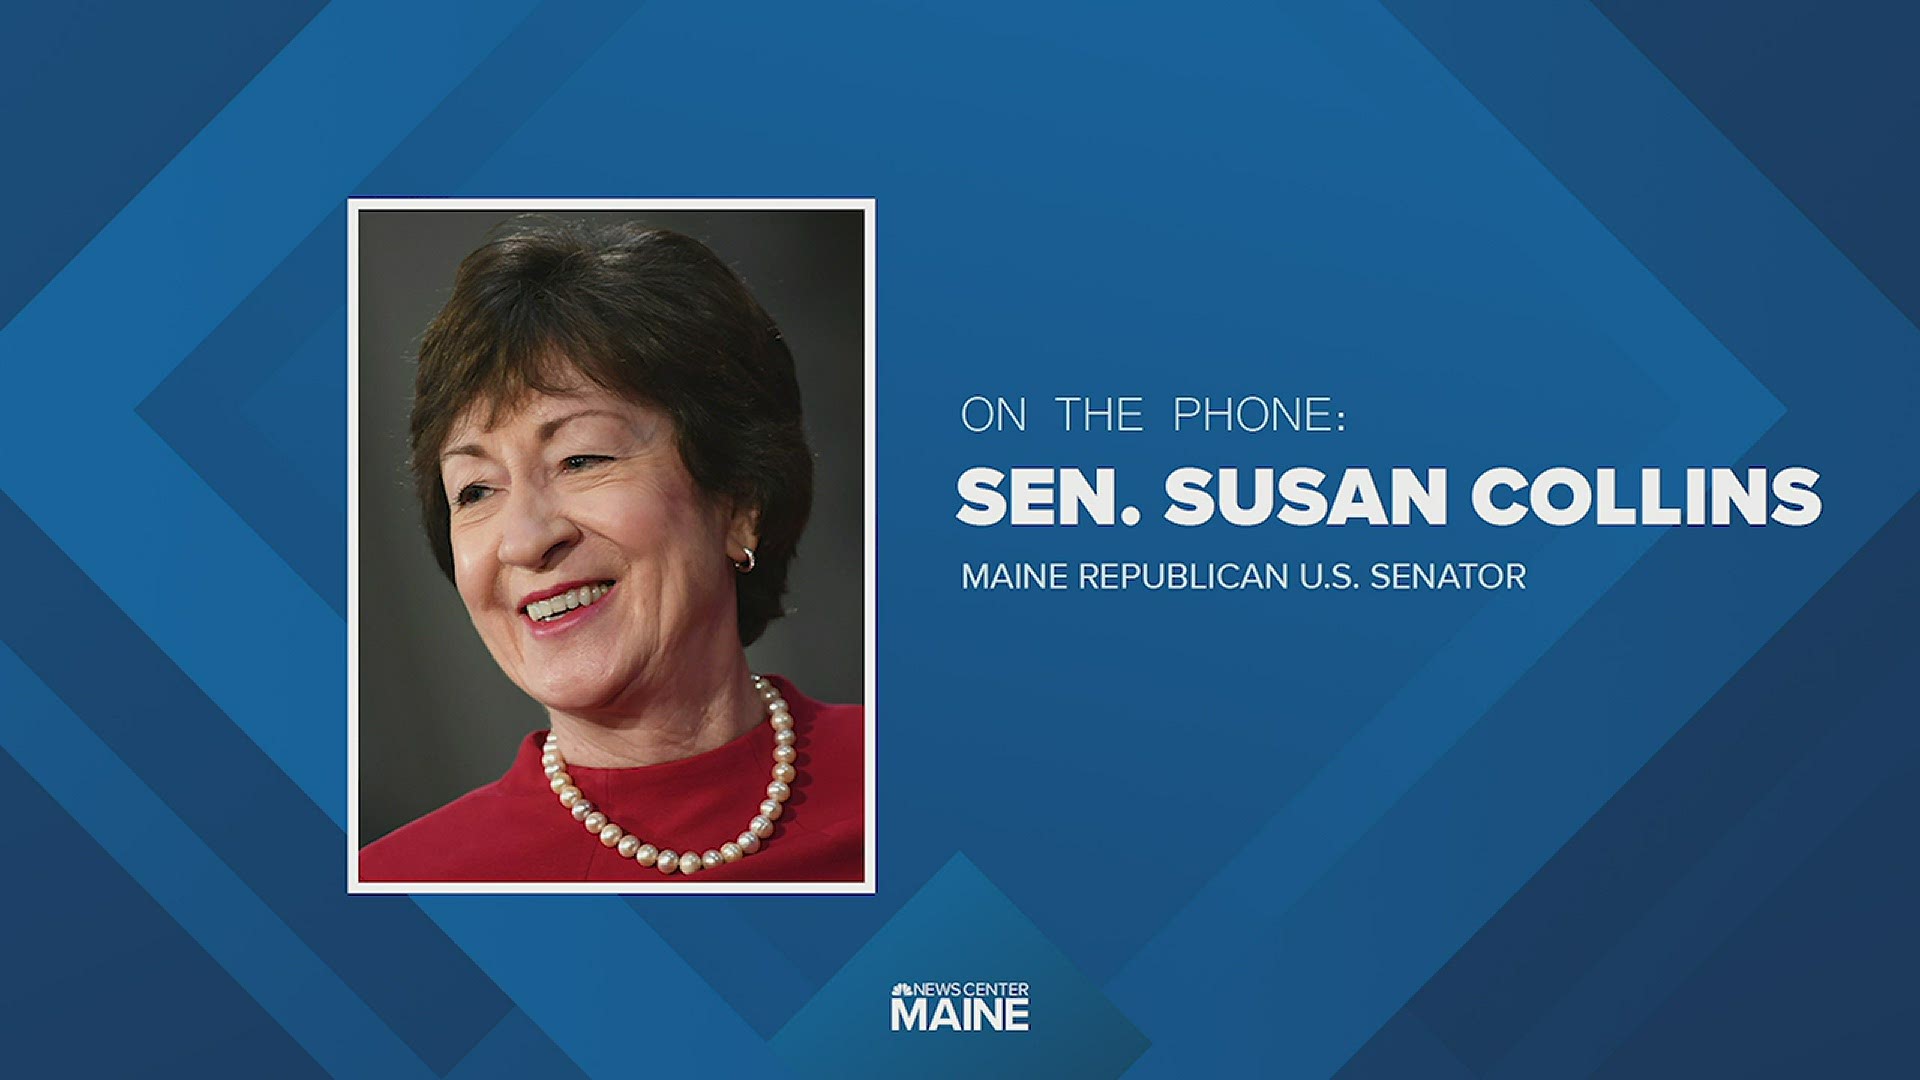 Maine Senator Susan Collins spoke to NEWS CENTER Maine's Lee Goldberg about her safety during the chaos at the Capitol Building in Washington D.C.